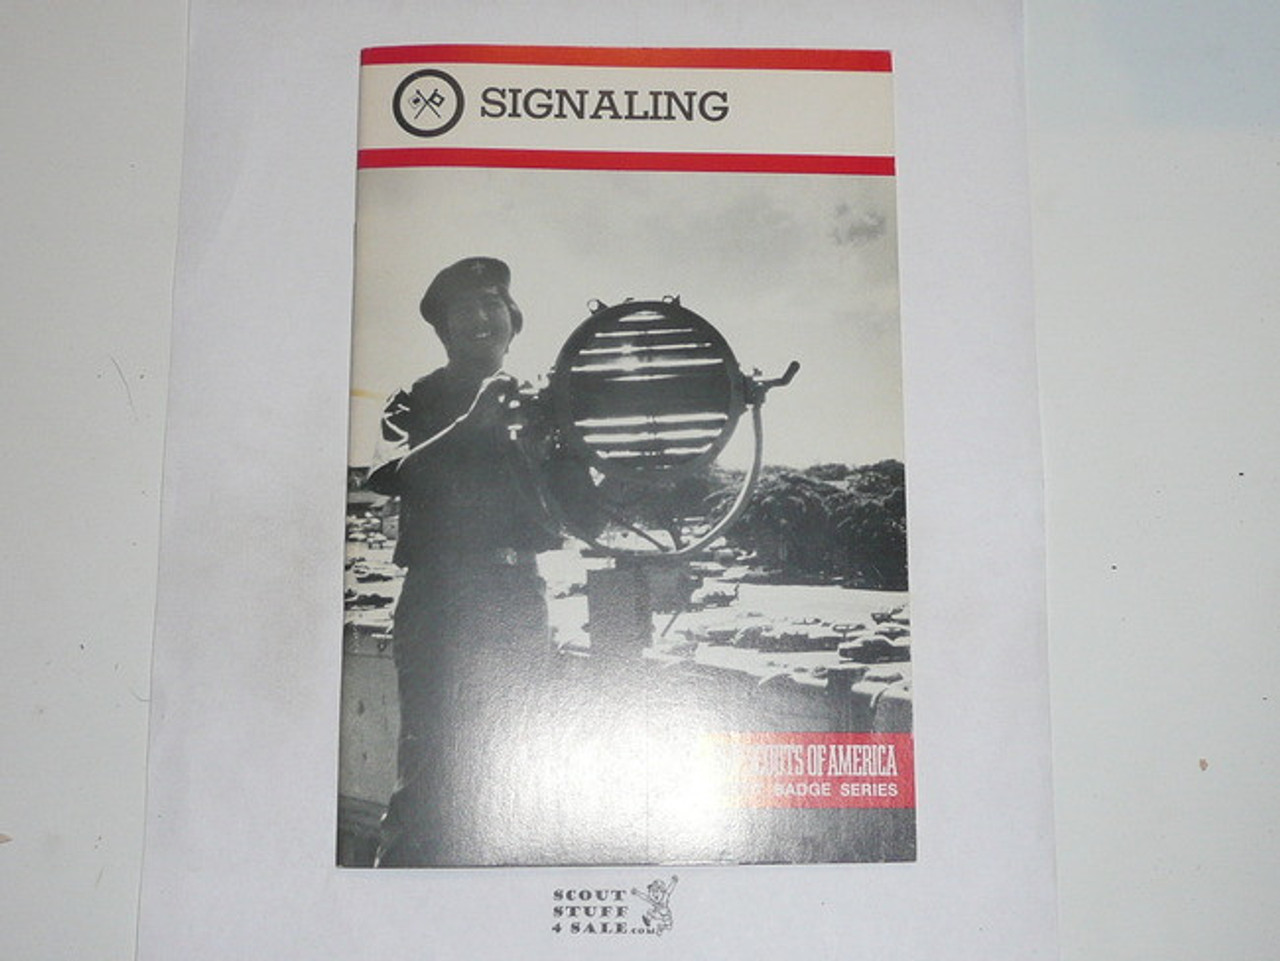 Signaling Merit Badge Pamphlet, Type 9, Red Band Cover, 7-88 Printing